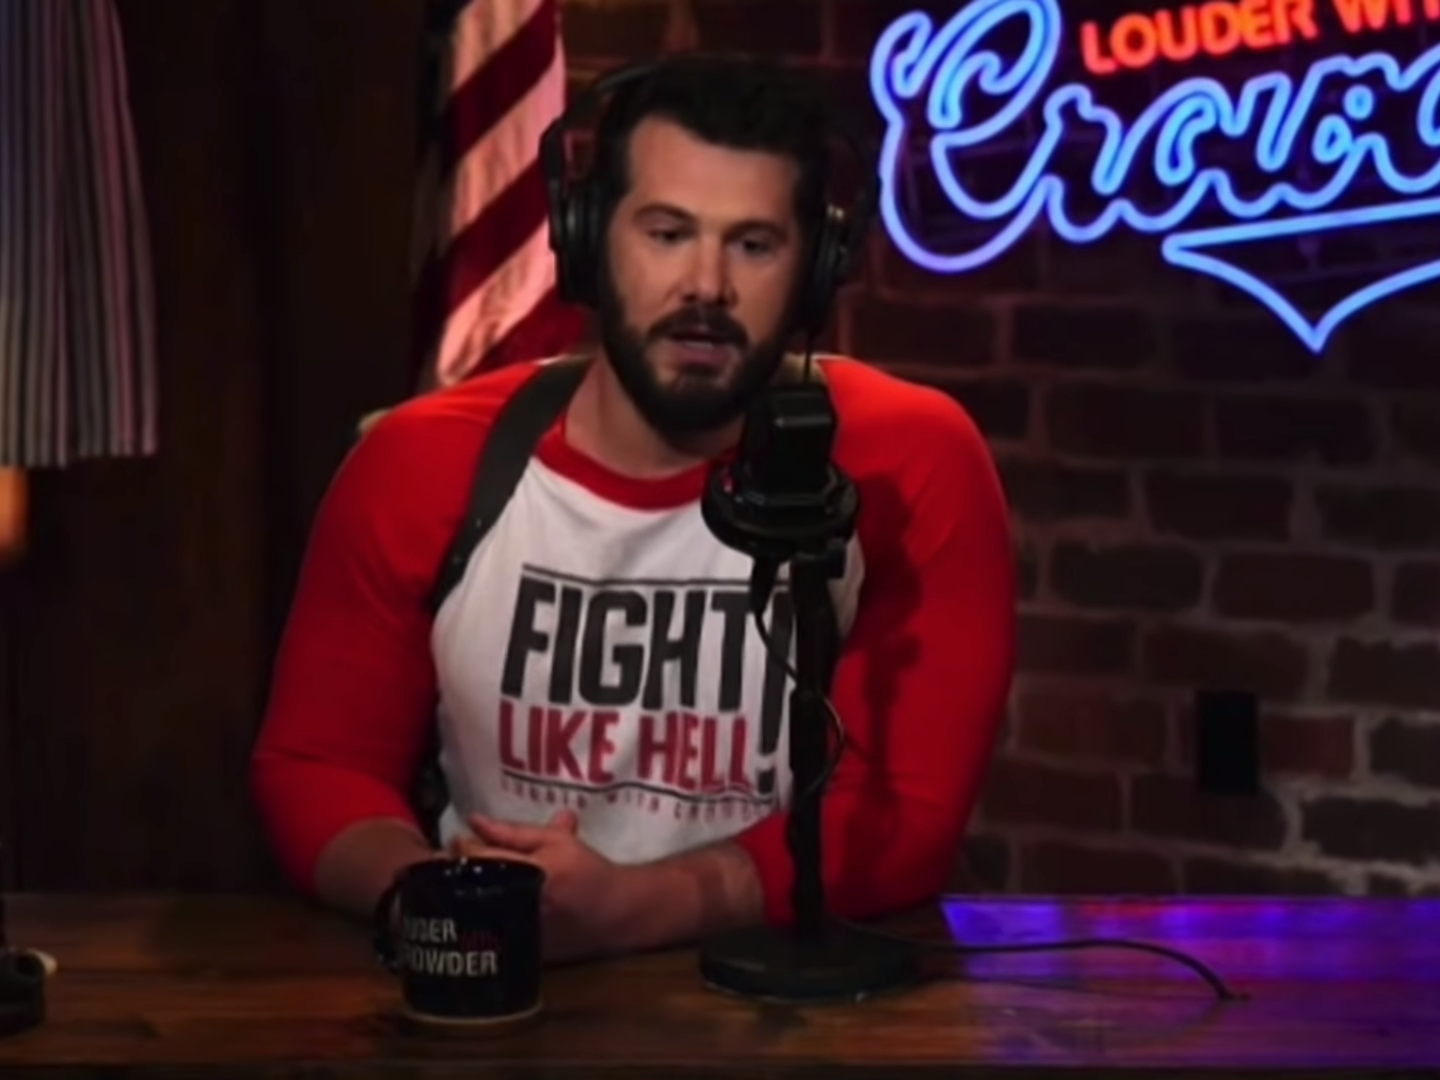 Steven Crowder on his YouTube show right before seeing Sam Seder